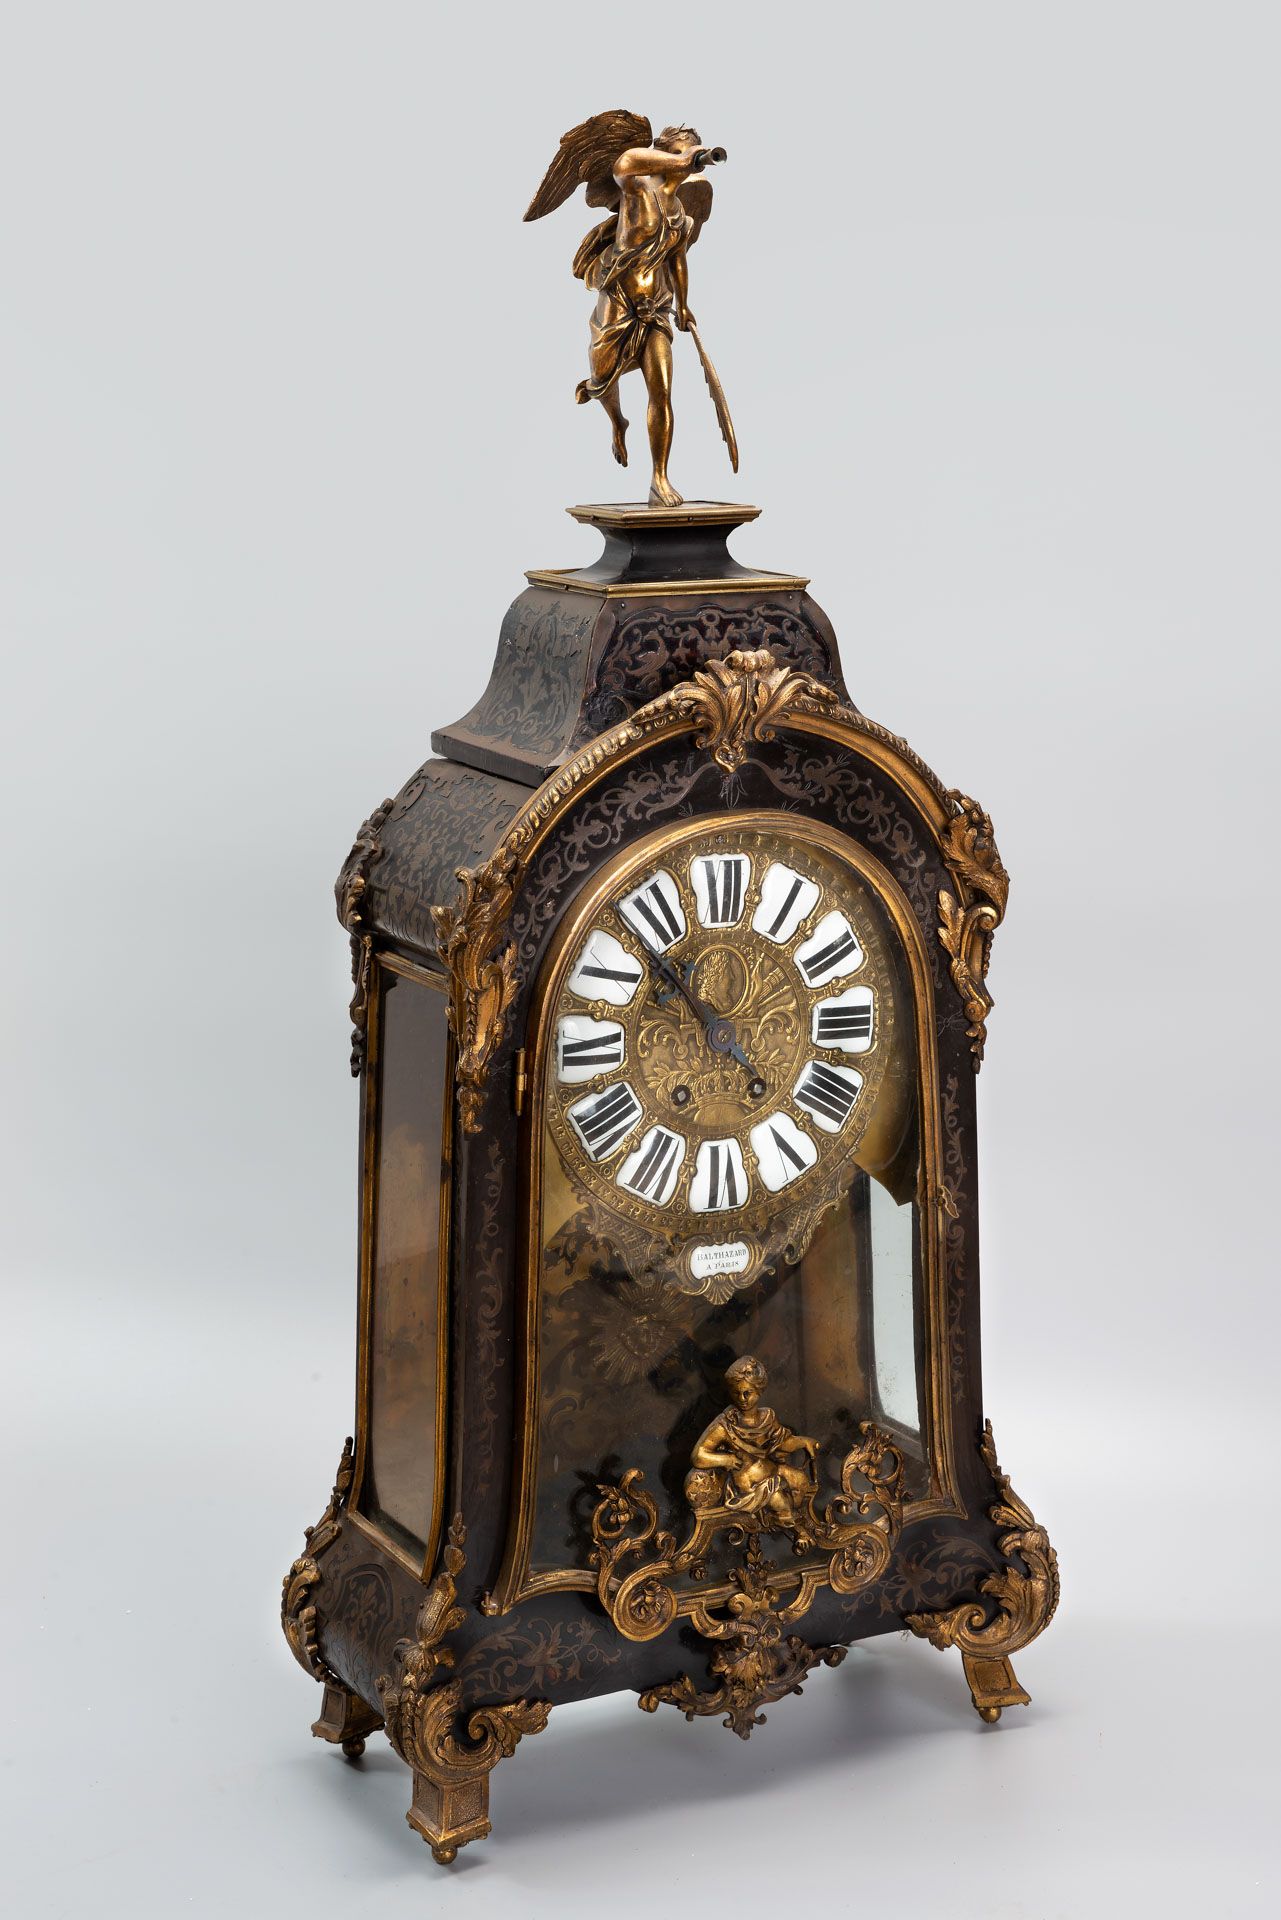 A Fine Boulle Clock by Charles Baltazar, France, Mid-Late 18th Century